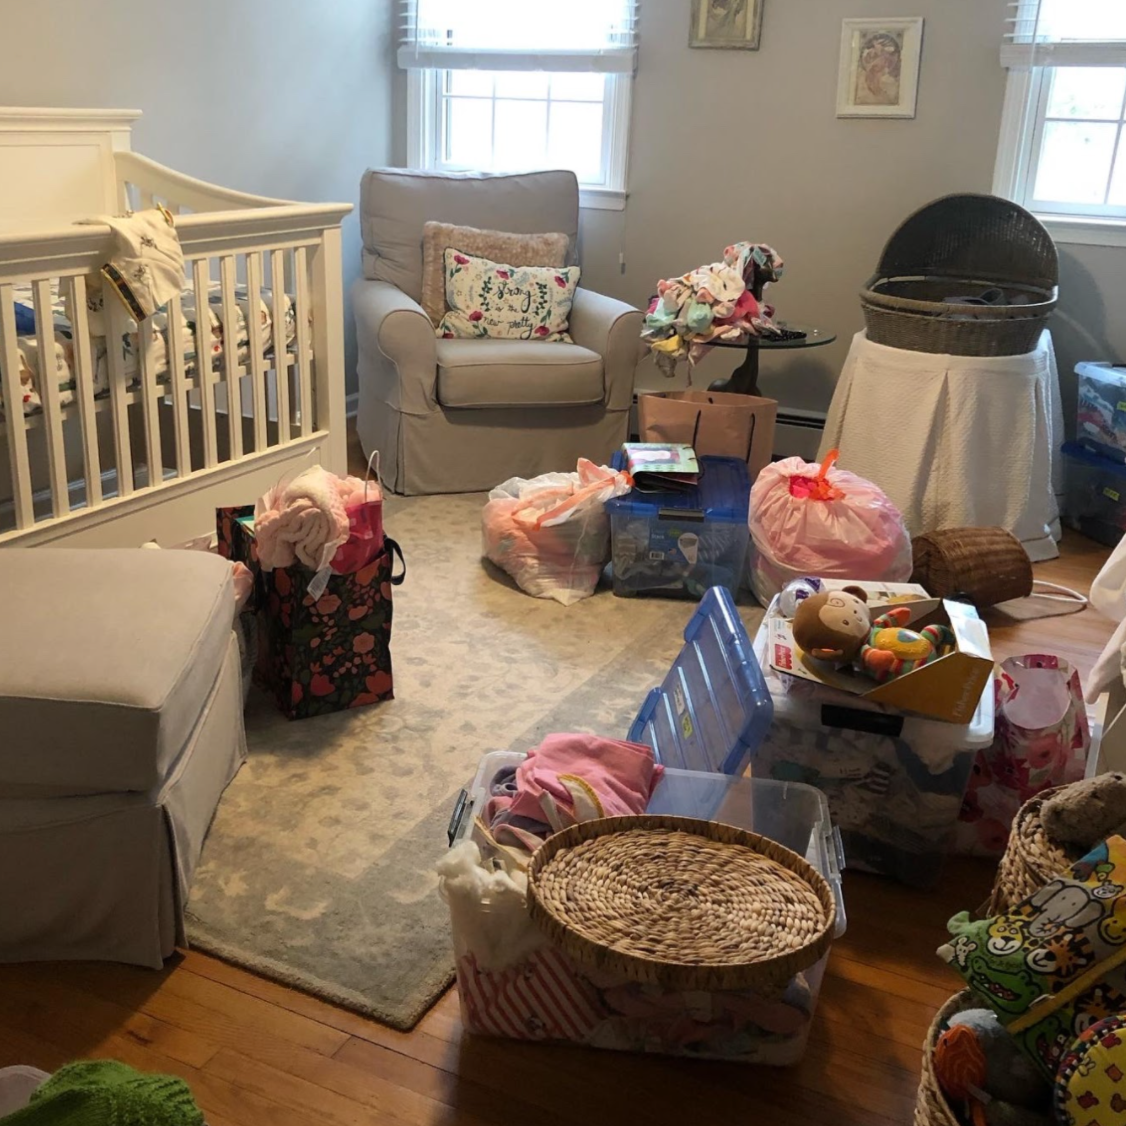 De-cluttered Childs Space